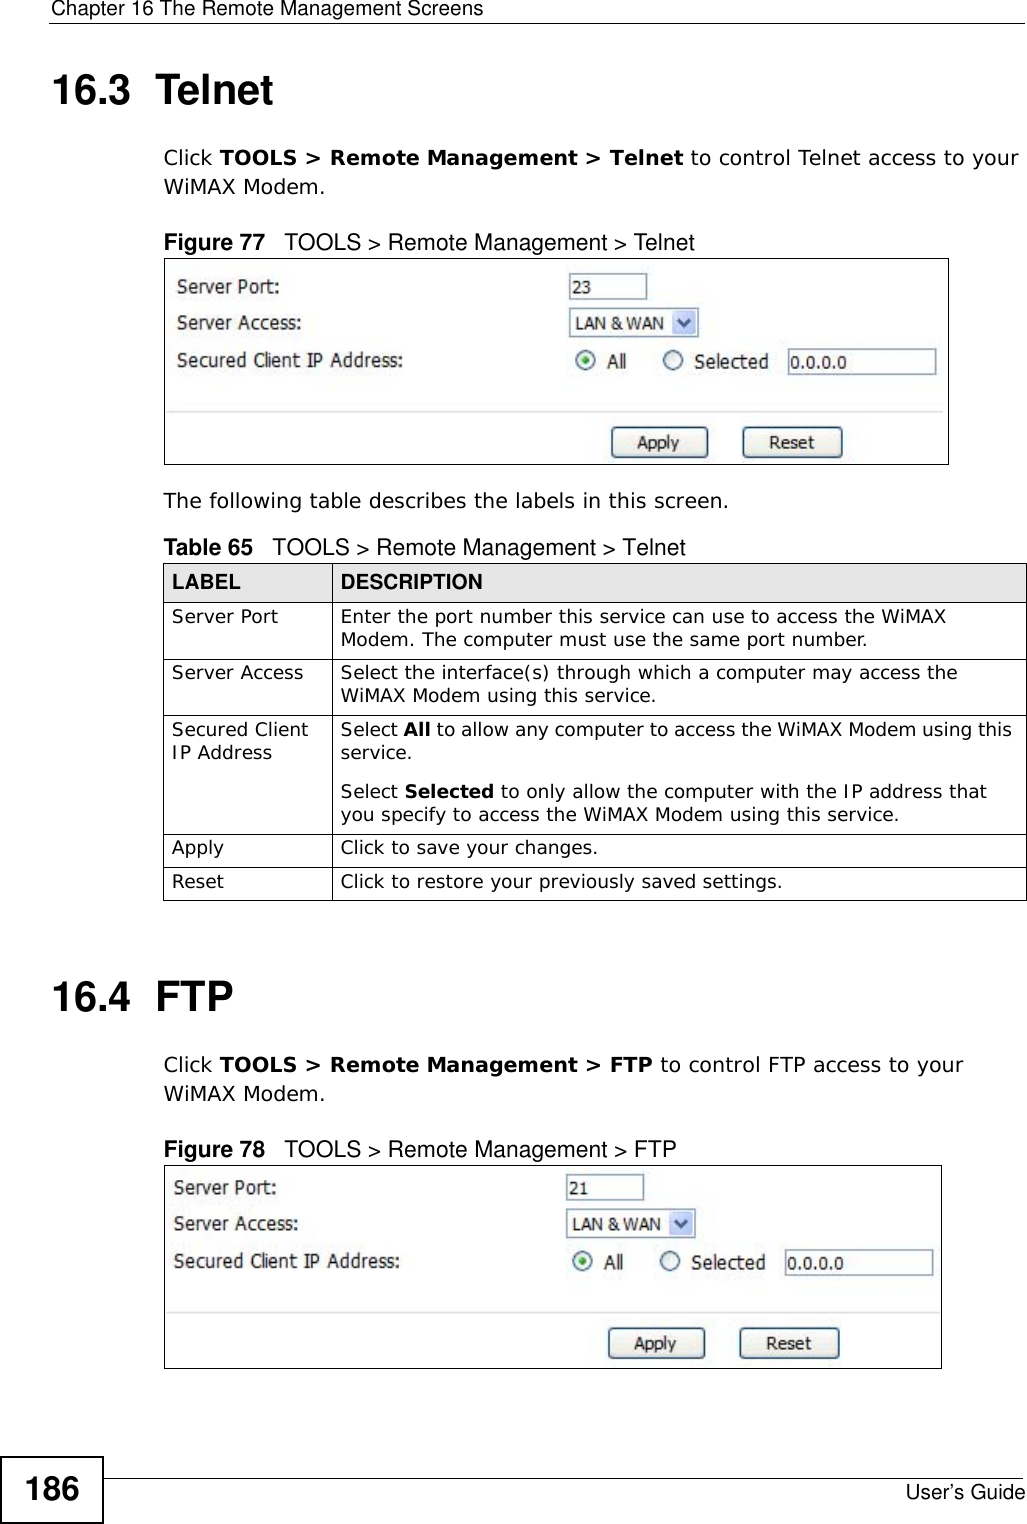 Chapter 16 The Remote Management ScreensUser’s Guide18616.3  TelnetClick TOOLS &gt; Remote Management &gt; Telnet to control Telnet access to your WiMAX Modem.Figure 77   TOOLS &gt; Remote Management &gt; TelnetThe following table describes the labels in this screen.16.4  FTPClick TOOLS &gt; Remote Management &gt; FTP to control FTP access to your WiMAX Modem.Figure 78   TOOLS &gt; Remote Management &gt; FTPTable 65   TOOLS &gt; Remote Management &gt; TelnetLABEL DESCRIPTIONServer Port Enter the port number this service can use to access the WiMAX Modem. The computer must use the same port number.Server Access Select the interface(s) through which a computer may access the WiMAX Modem using this service.Secured Client IP Address Select All to allow any computer to access the WiMAX Modem using this service.Select Selected to only allow the computer with the IP address that you specify to access the WiMAX Modem using this service.Apply Click to save your changes.Reset Click to restore your previously saved settings.